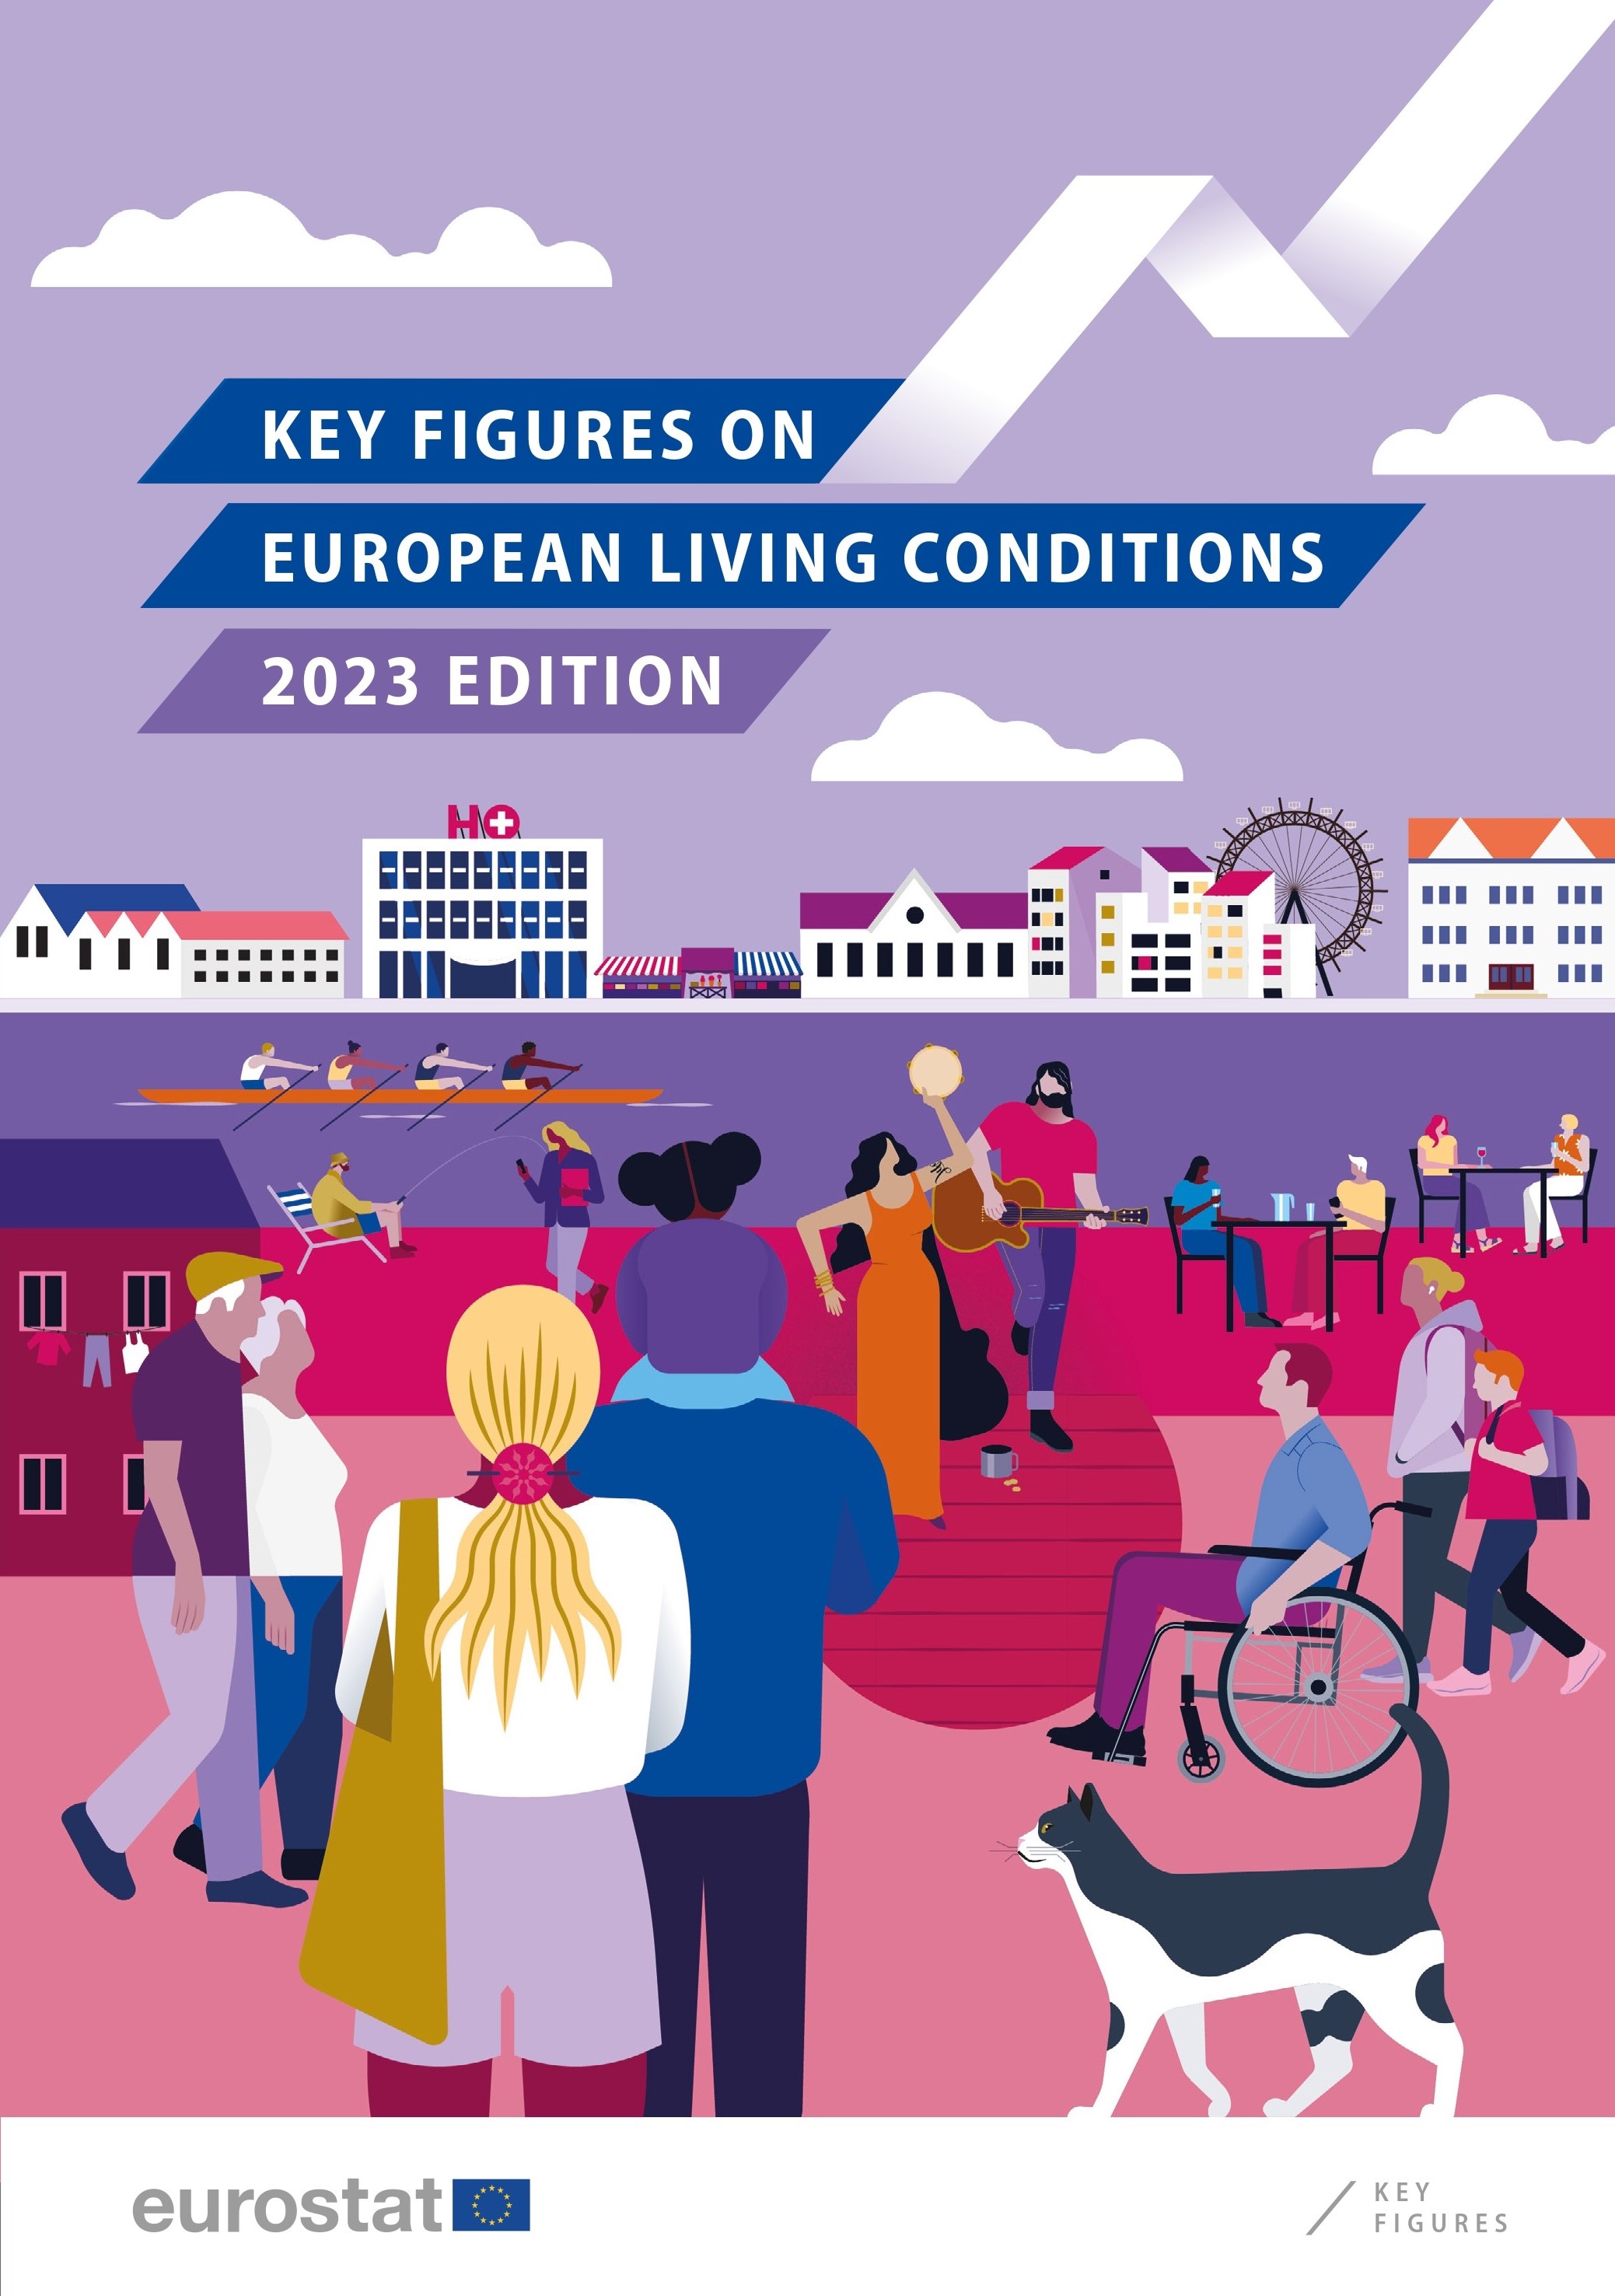 Key figures on European living conditions - 2023 edition